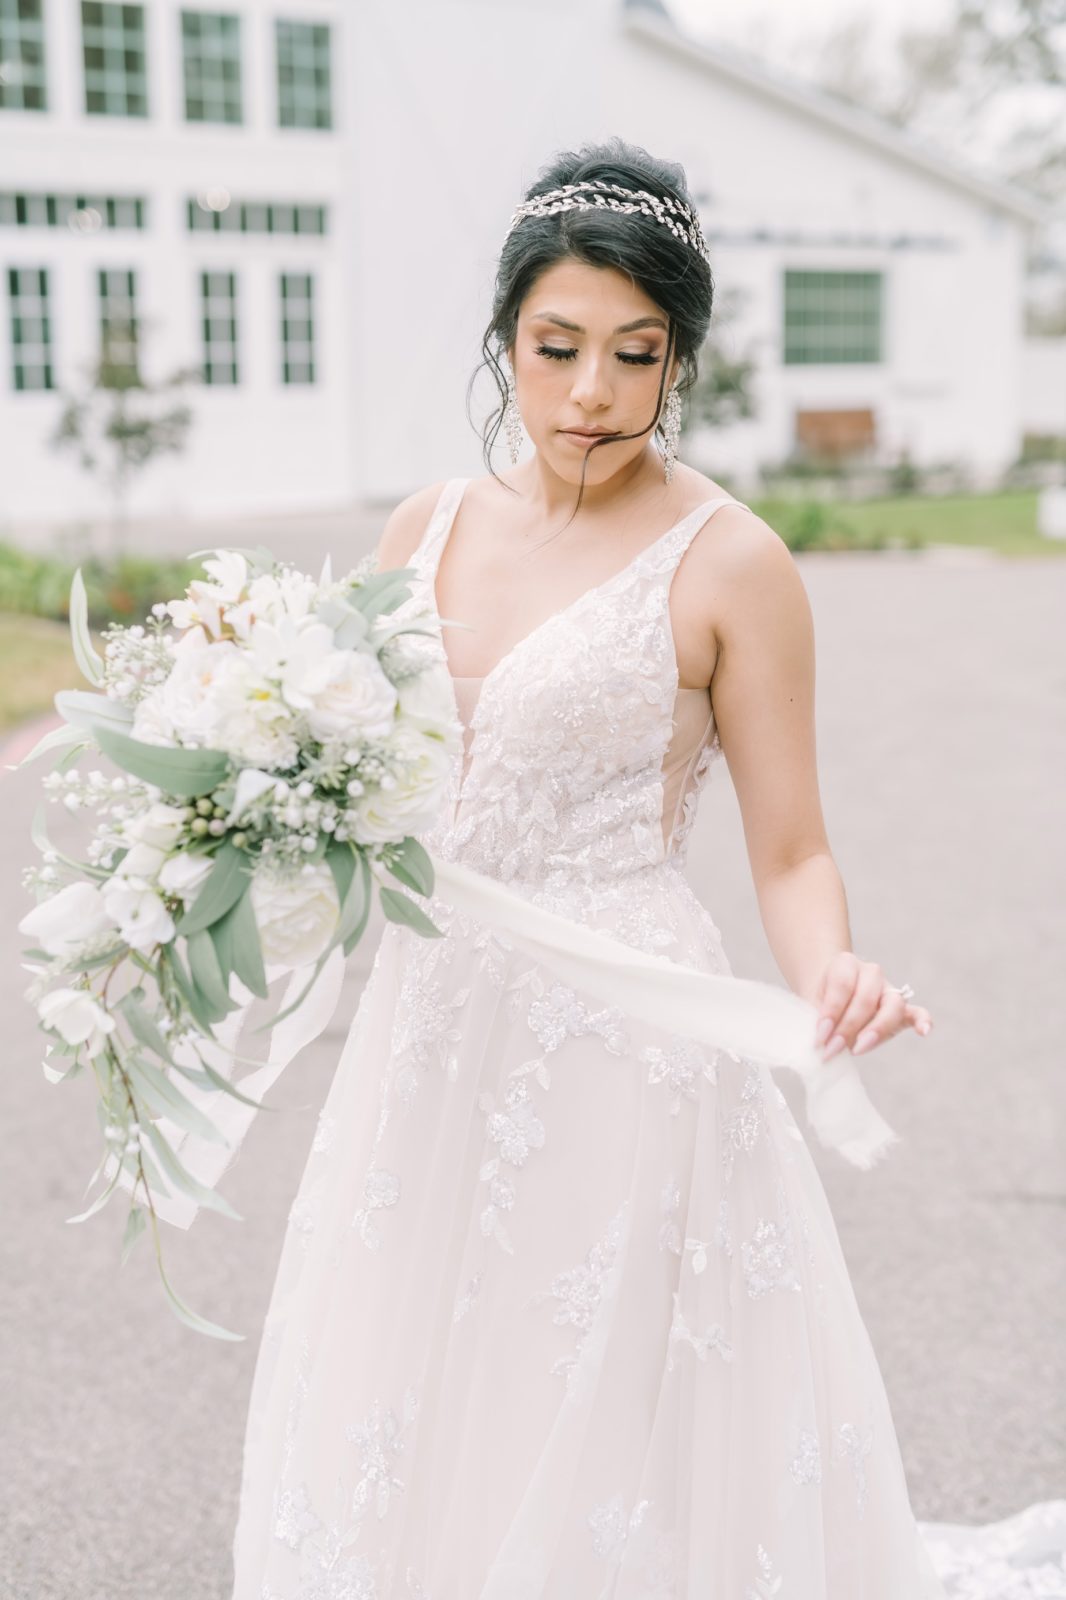 Bride in a lace v-neck wedding gown and white floral bouquet by Christina Elliott Photography. farmhouse bridal updo #ChristinaElliottPhotography #ChristinaElliottBridals #Houstonweddings #Farmhousewedding #TheSpringsVenue #BridalsHouston